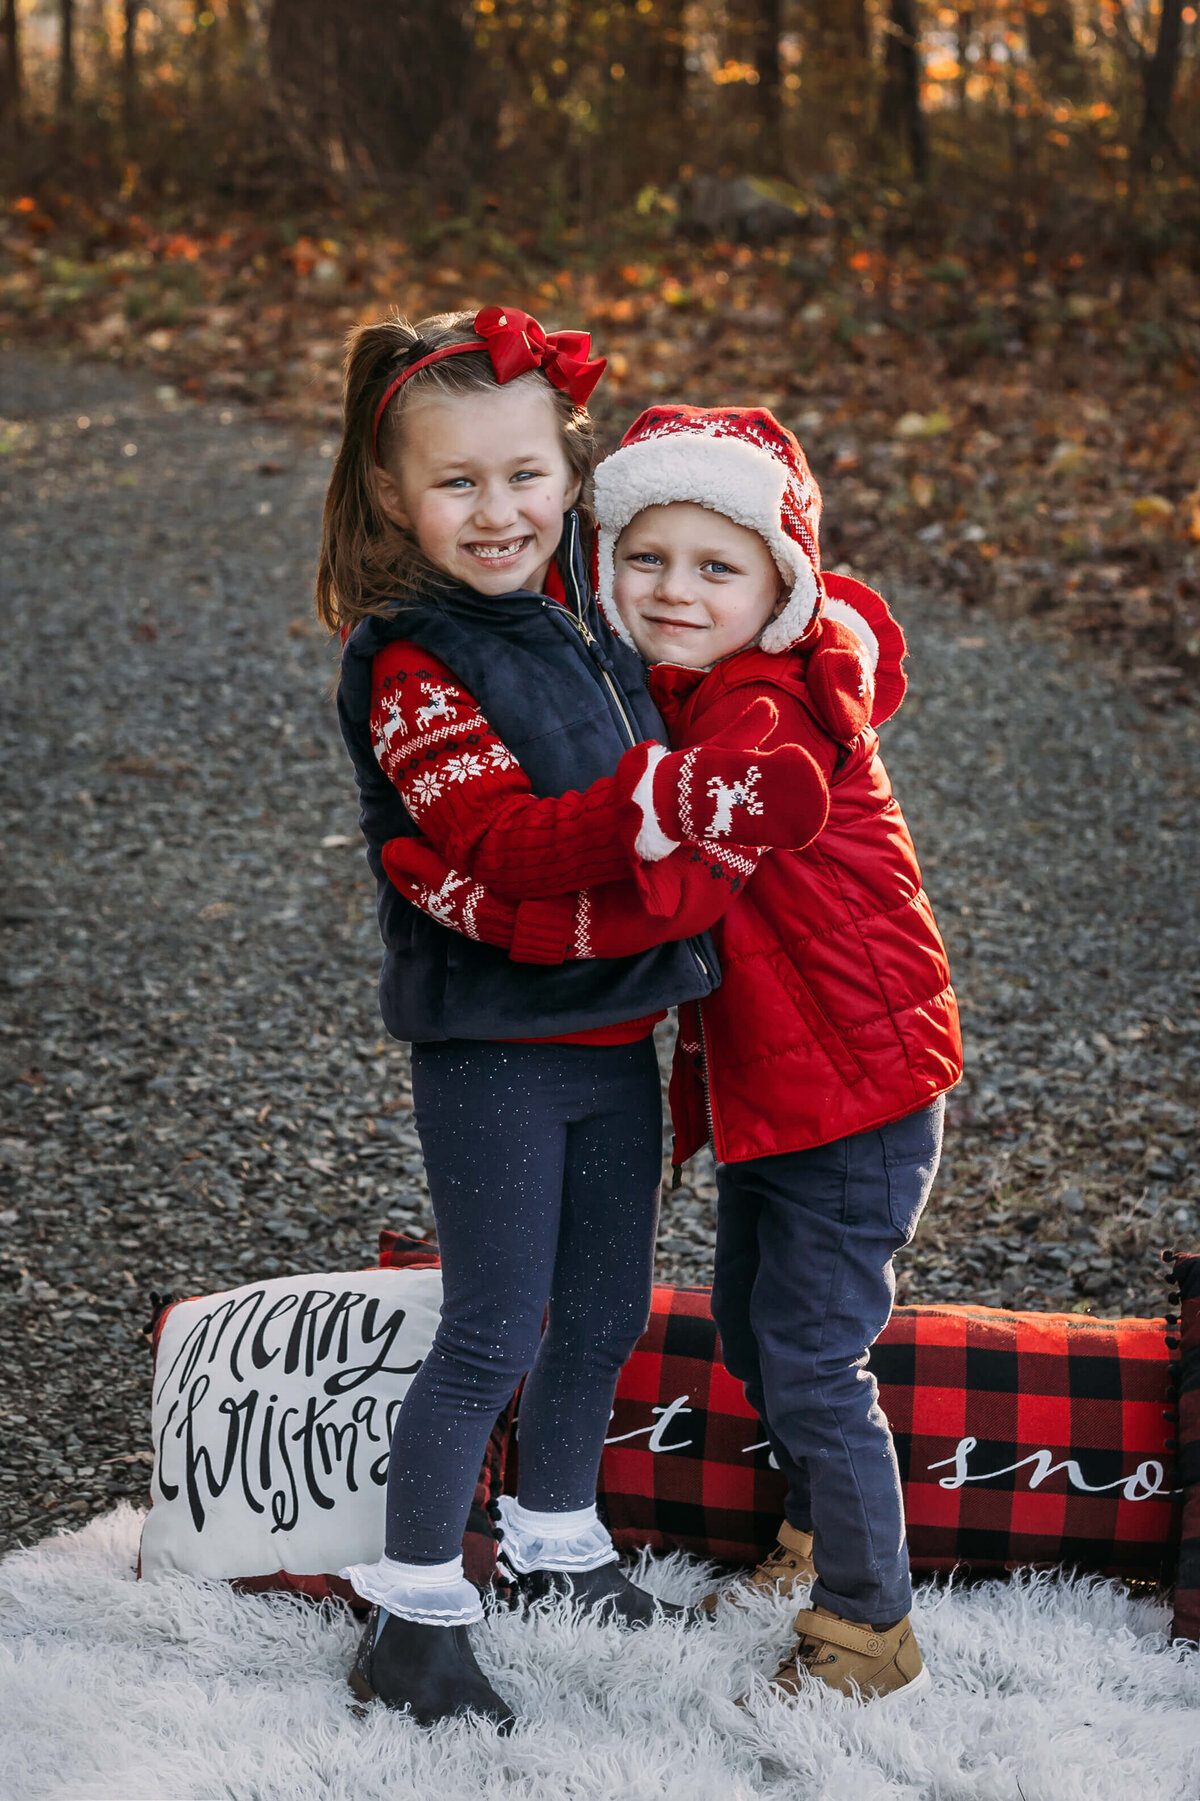 brother and sister wearing christmas themed  winter clothing standing on a white fur blanket with xmas pillows and fall leaves